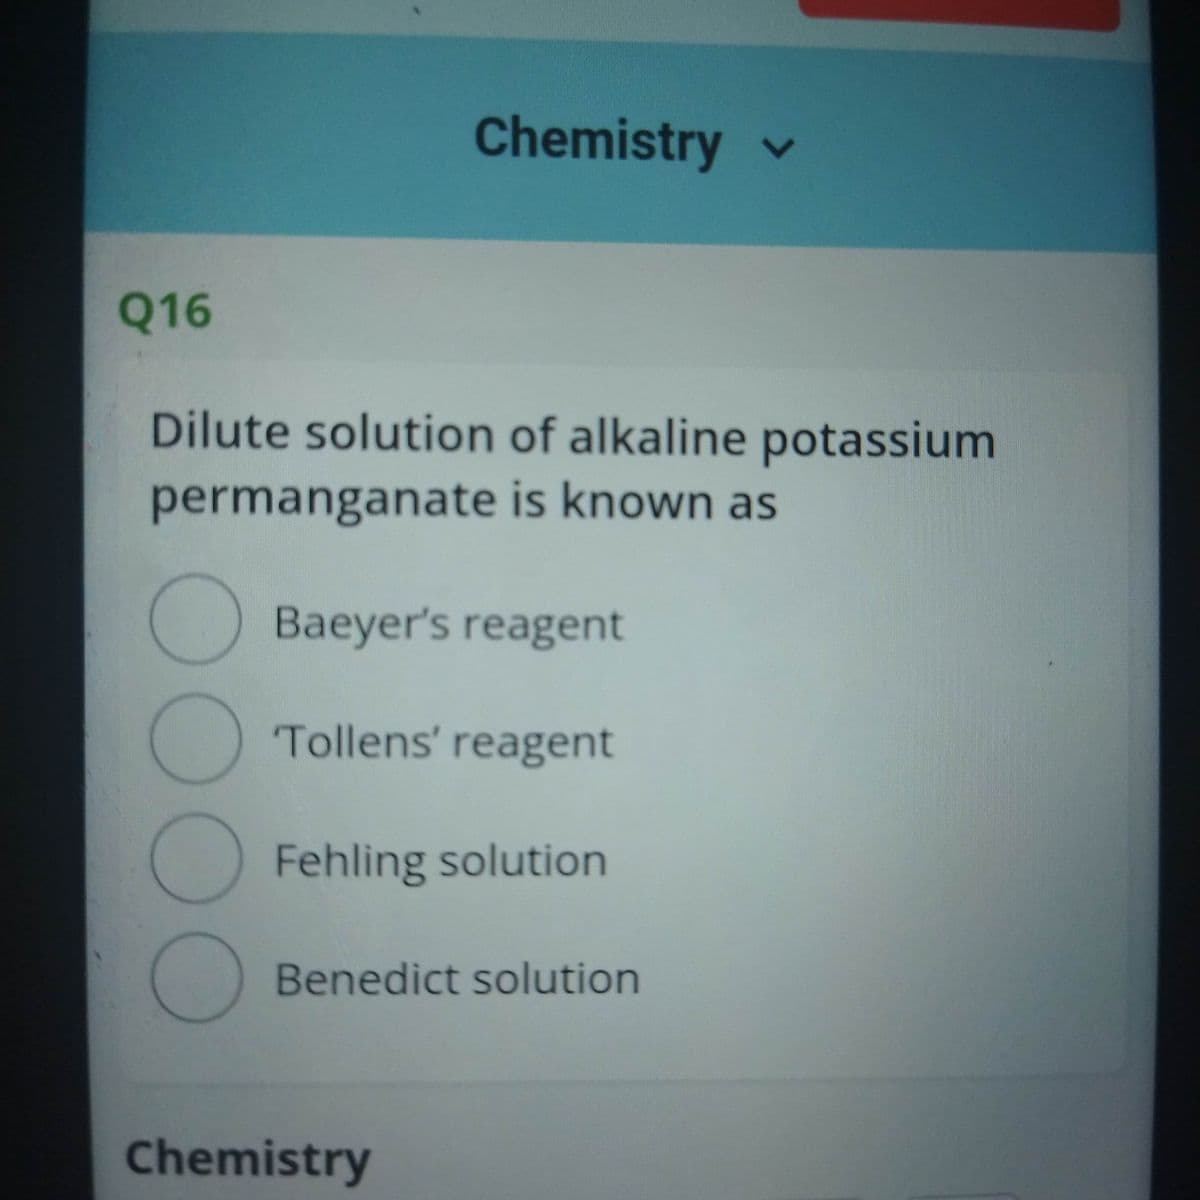 Chemistry
Q16
Dilute solution of alkaline potassium
permanganate is known as
() Baeyer's reagent
Tollens' reagent
Fehling solution
Benedict solution
Chemistry
